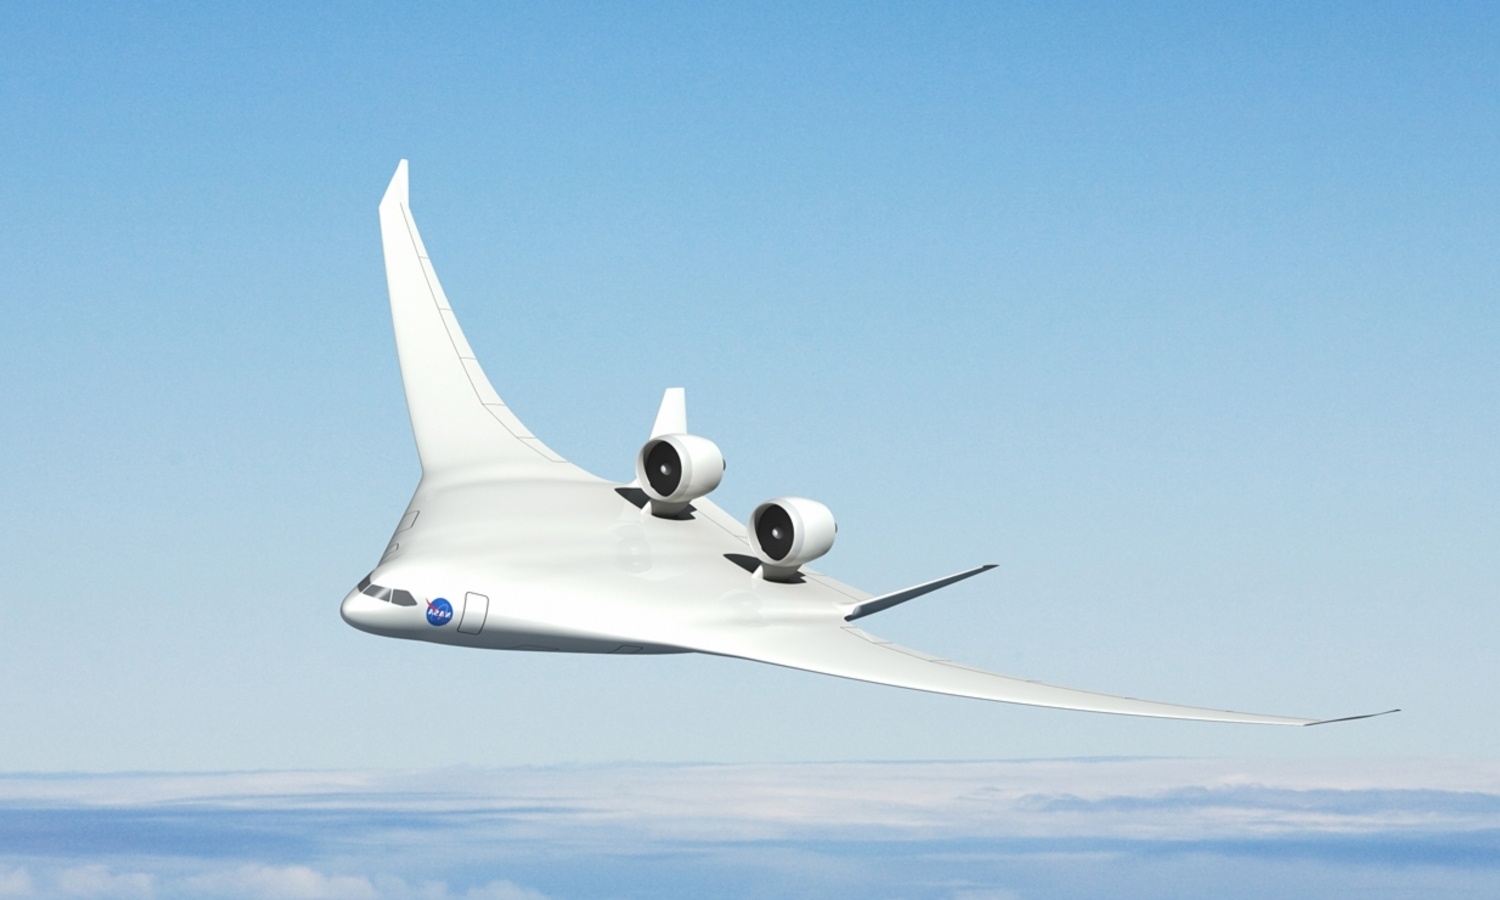 Boeing and NASA BWB X-48C ∧ SOS BWB-1 → X-48C derived BWB with Turbofanprops and Turbopropfans, and Winglets (Image by NASA and Boeing)